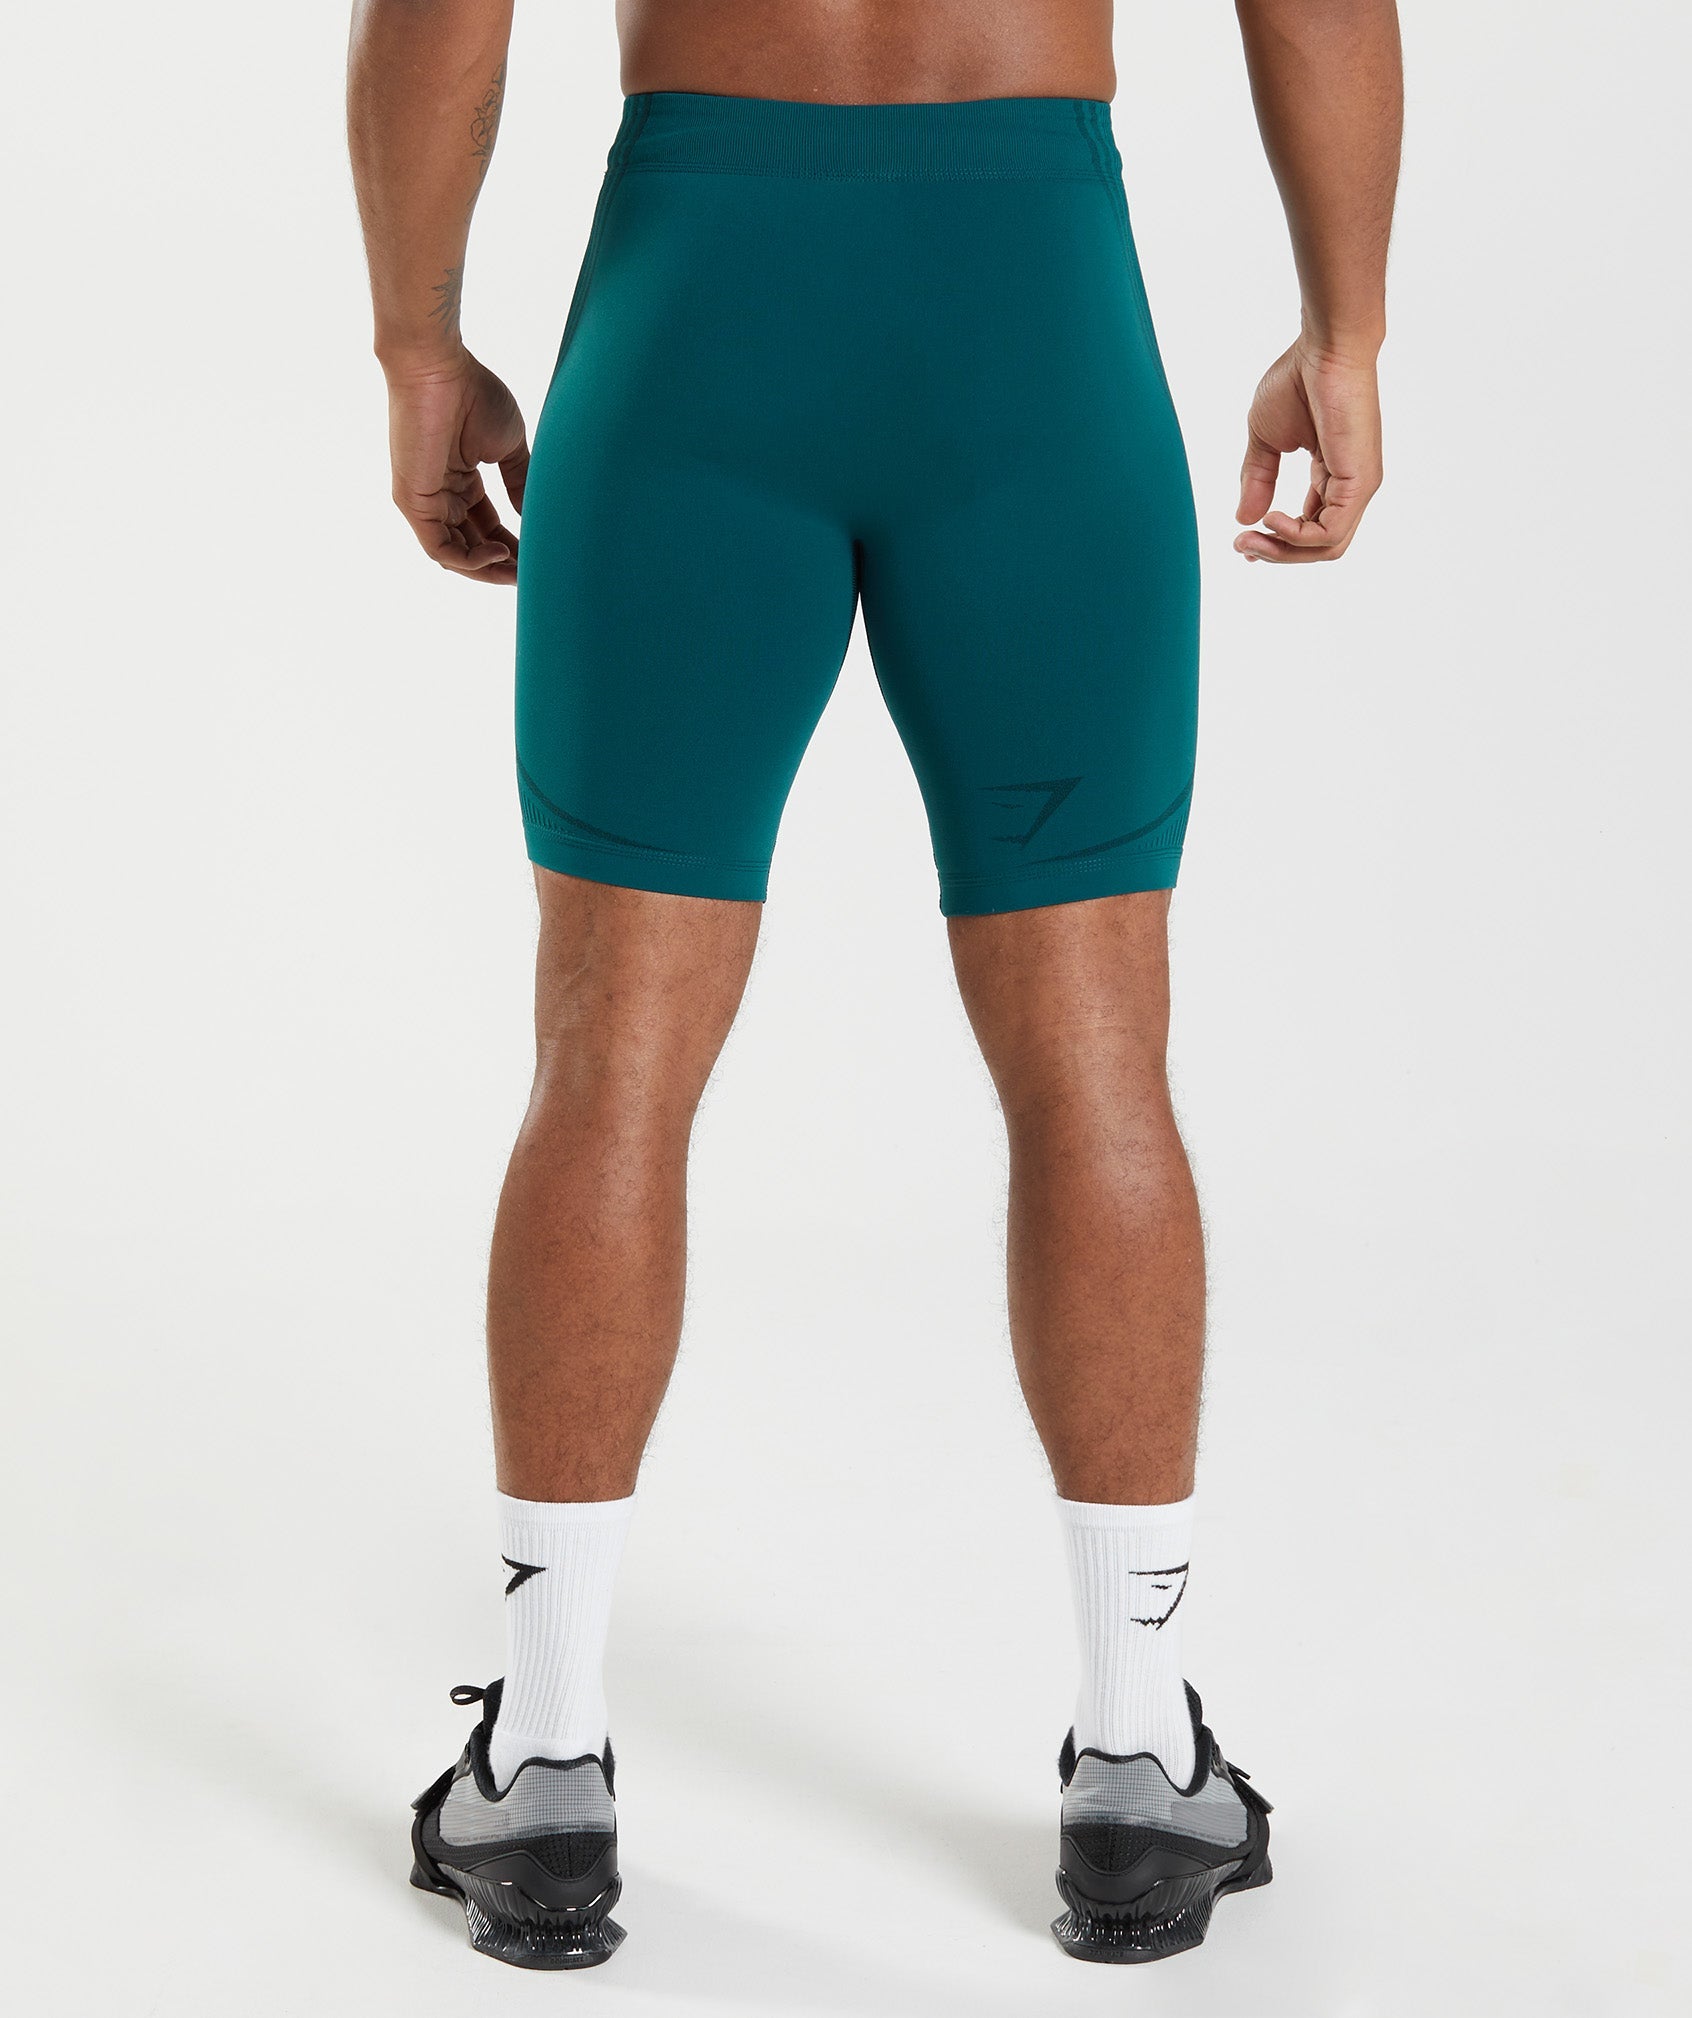 315 Seamless 1/2 Shorts in Winter Teal/Black - view 2